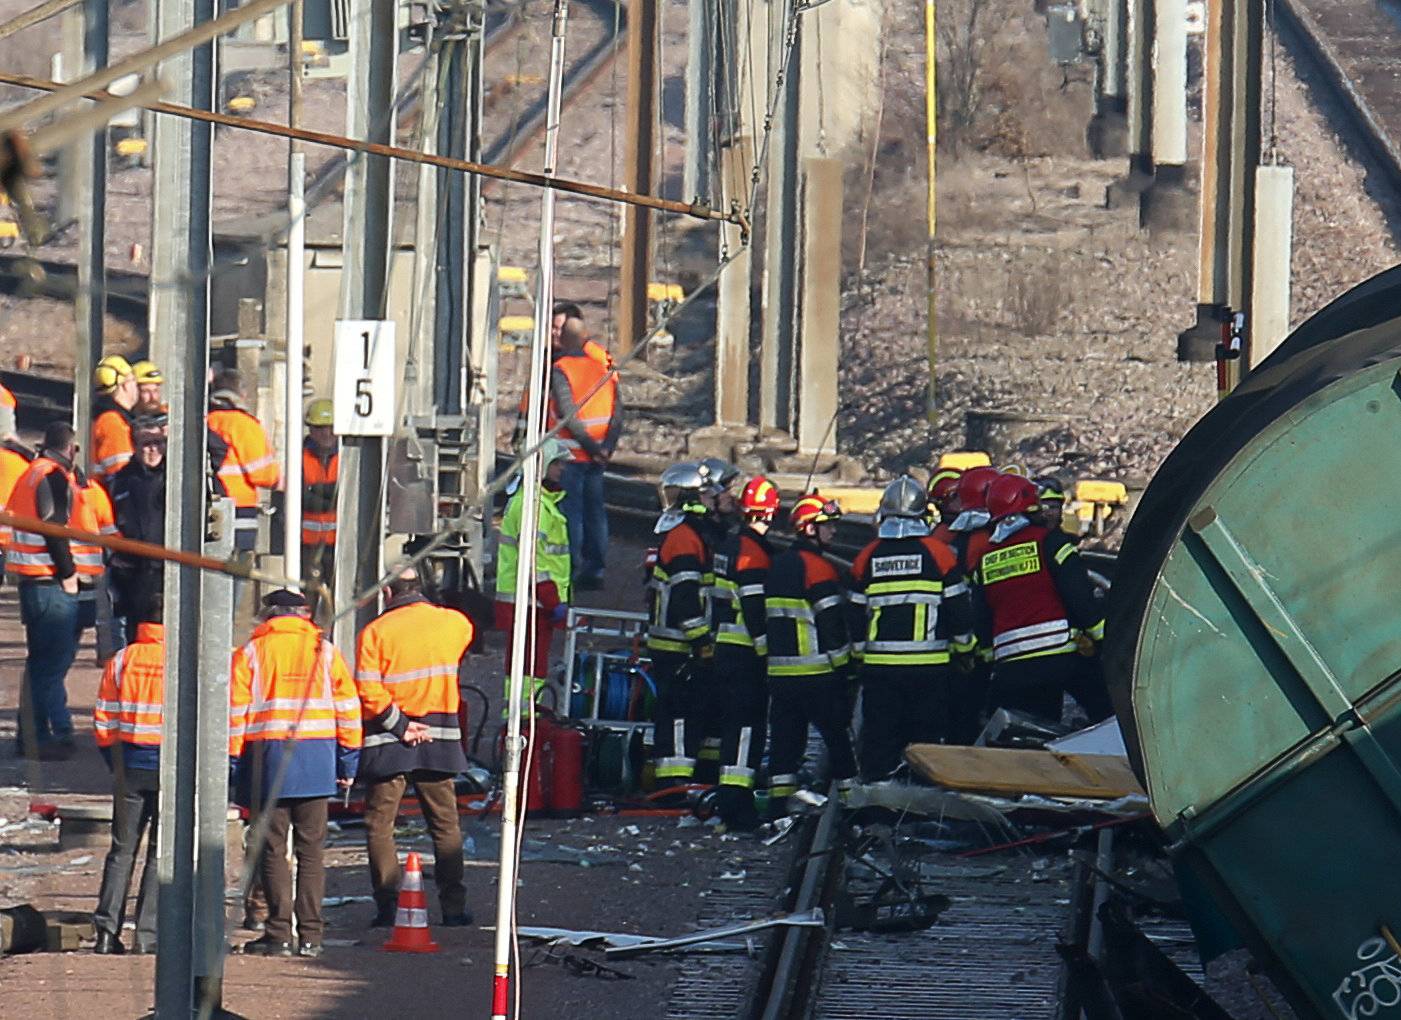 Rescuers stand next the wreckage of a passenger and freight train after a crash near Bettembourg